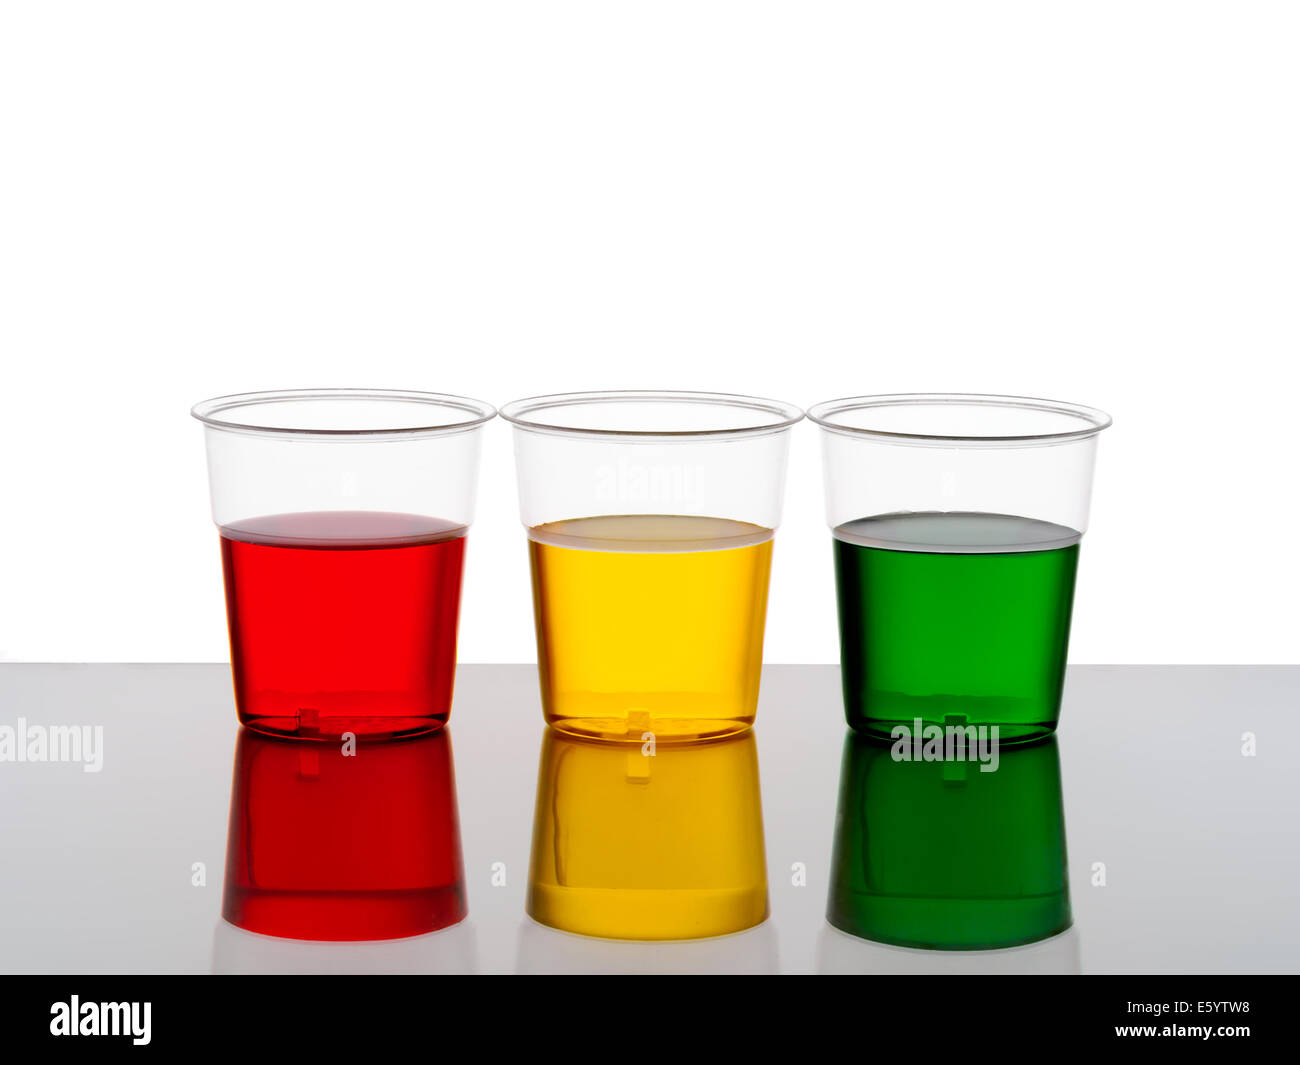 Bright traffic light coloured drinks. Drink drive warning maybe. Stock Photo